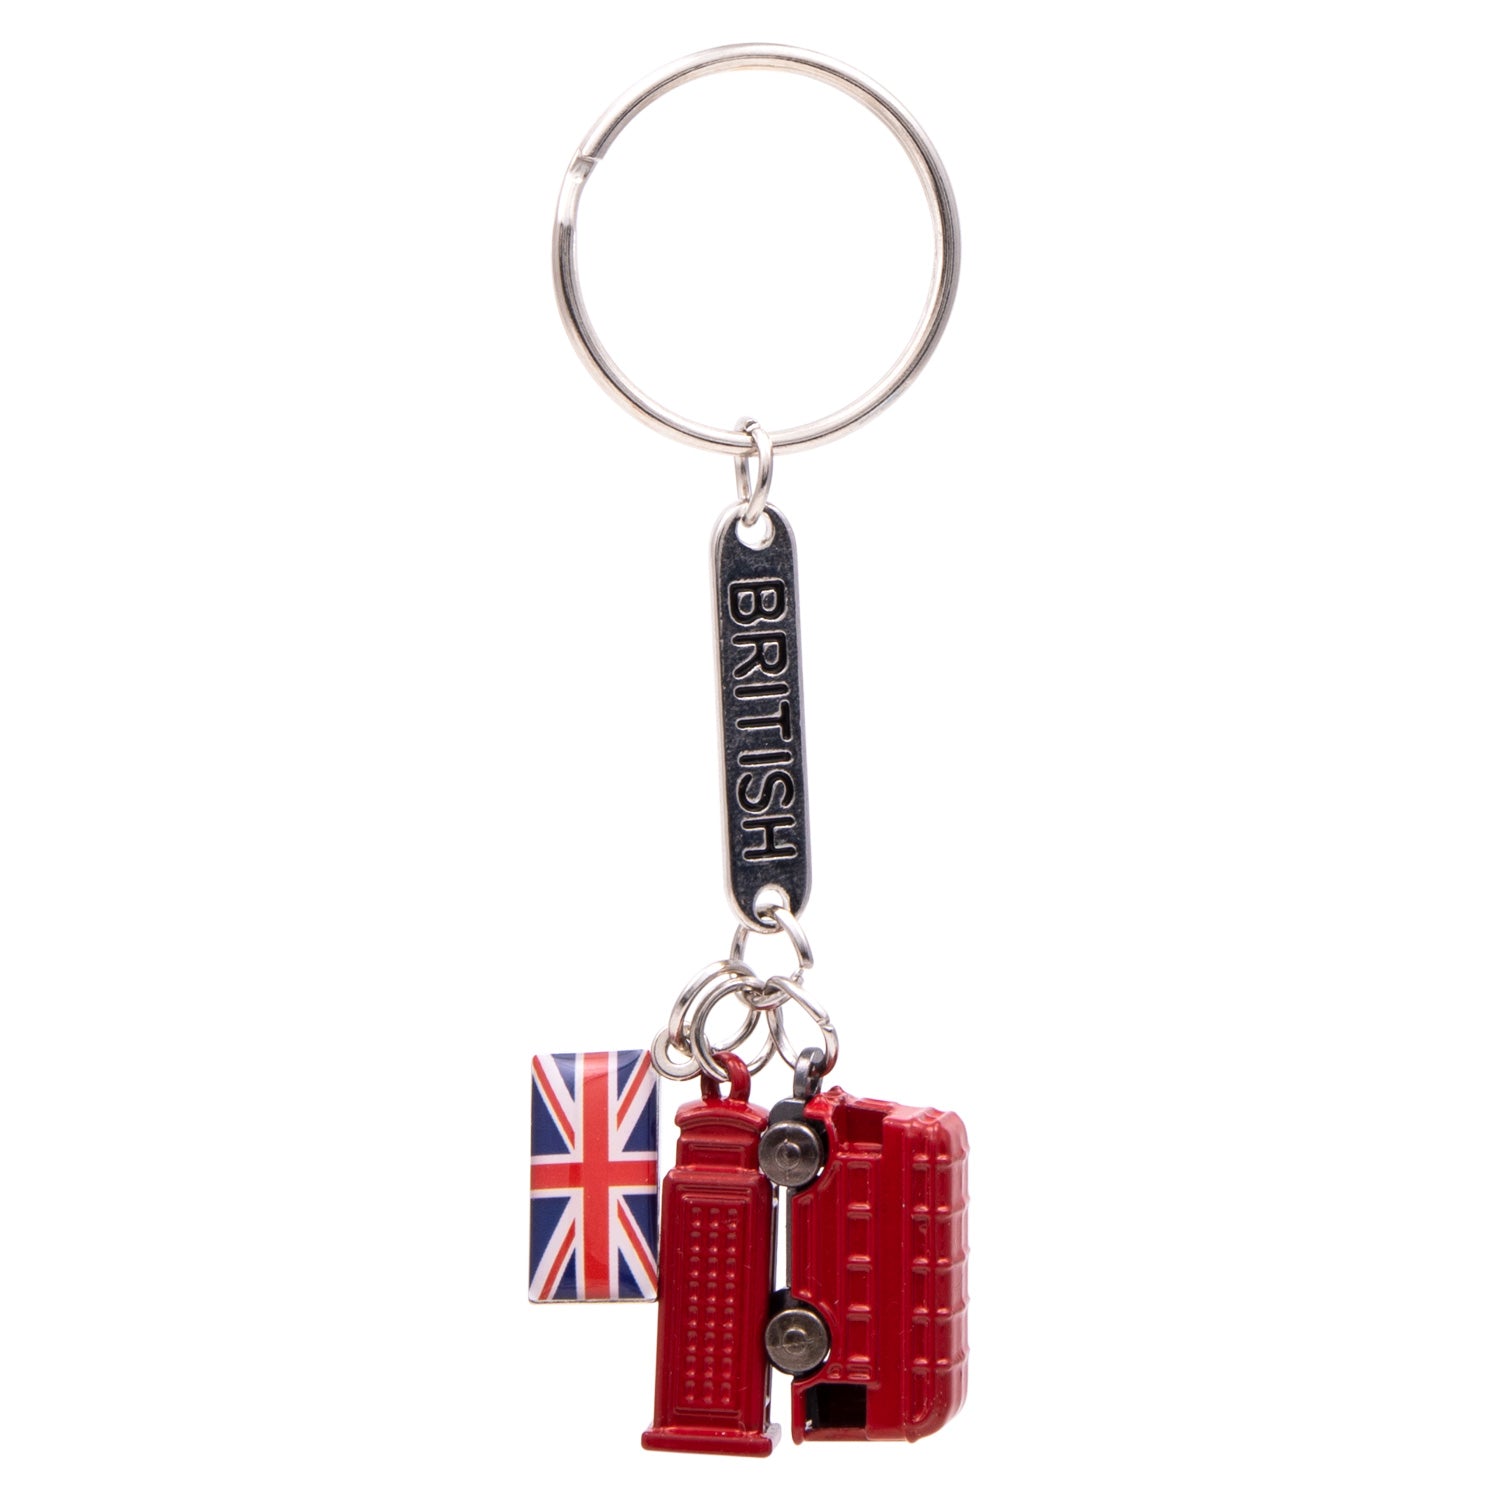 Best of British - London Bus, Telephone Box and Union Jack Die Cast Keyring 2